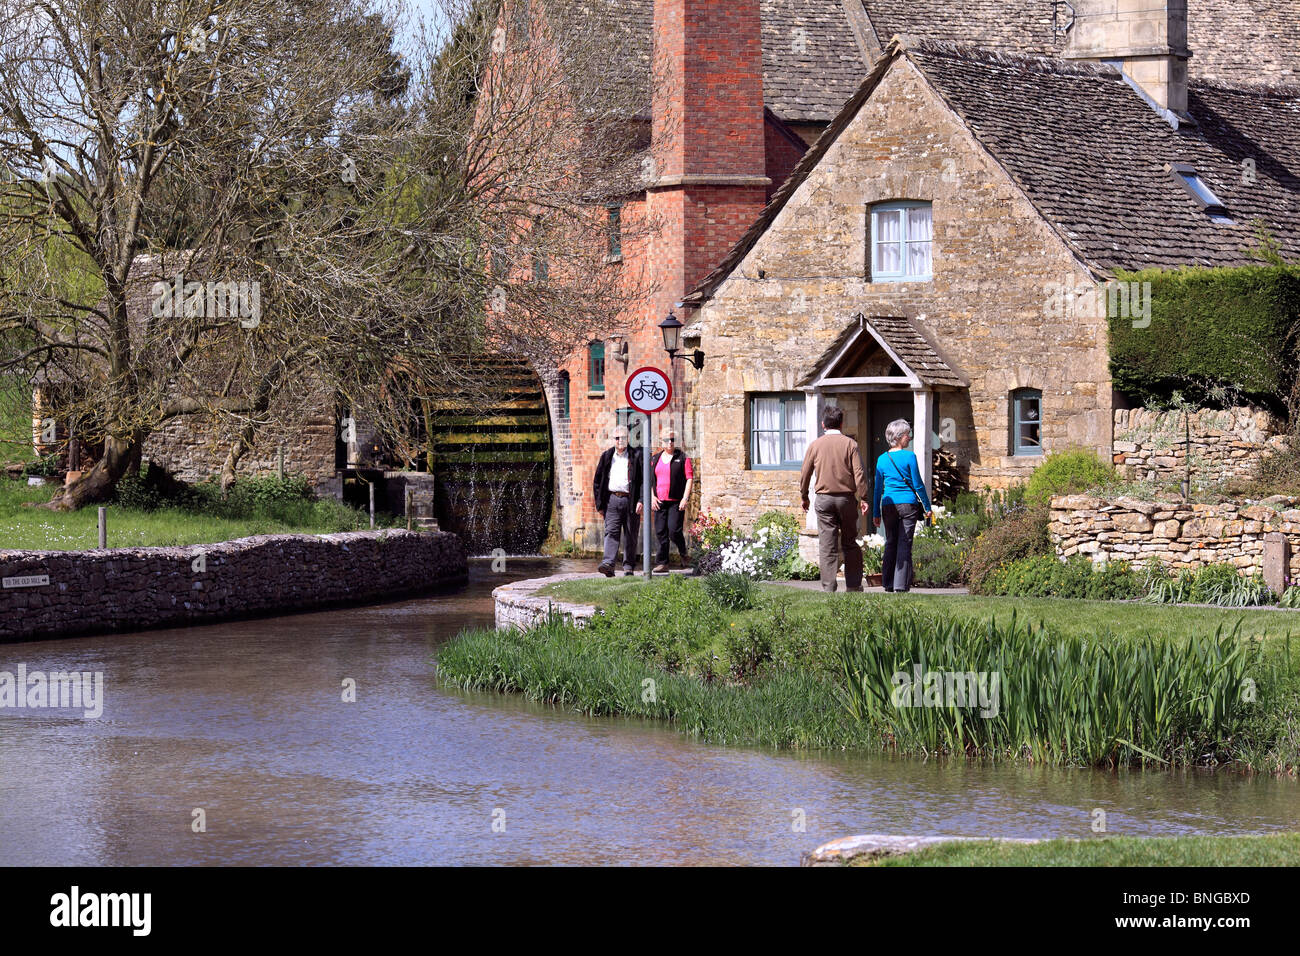 Lower Slaughter corn mill dal fiume occhio, Lower Slaughter, Gloucestershire Foto Stock